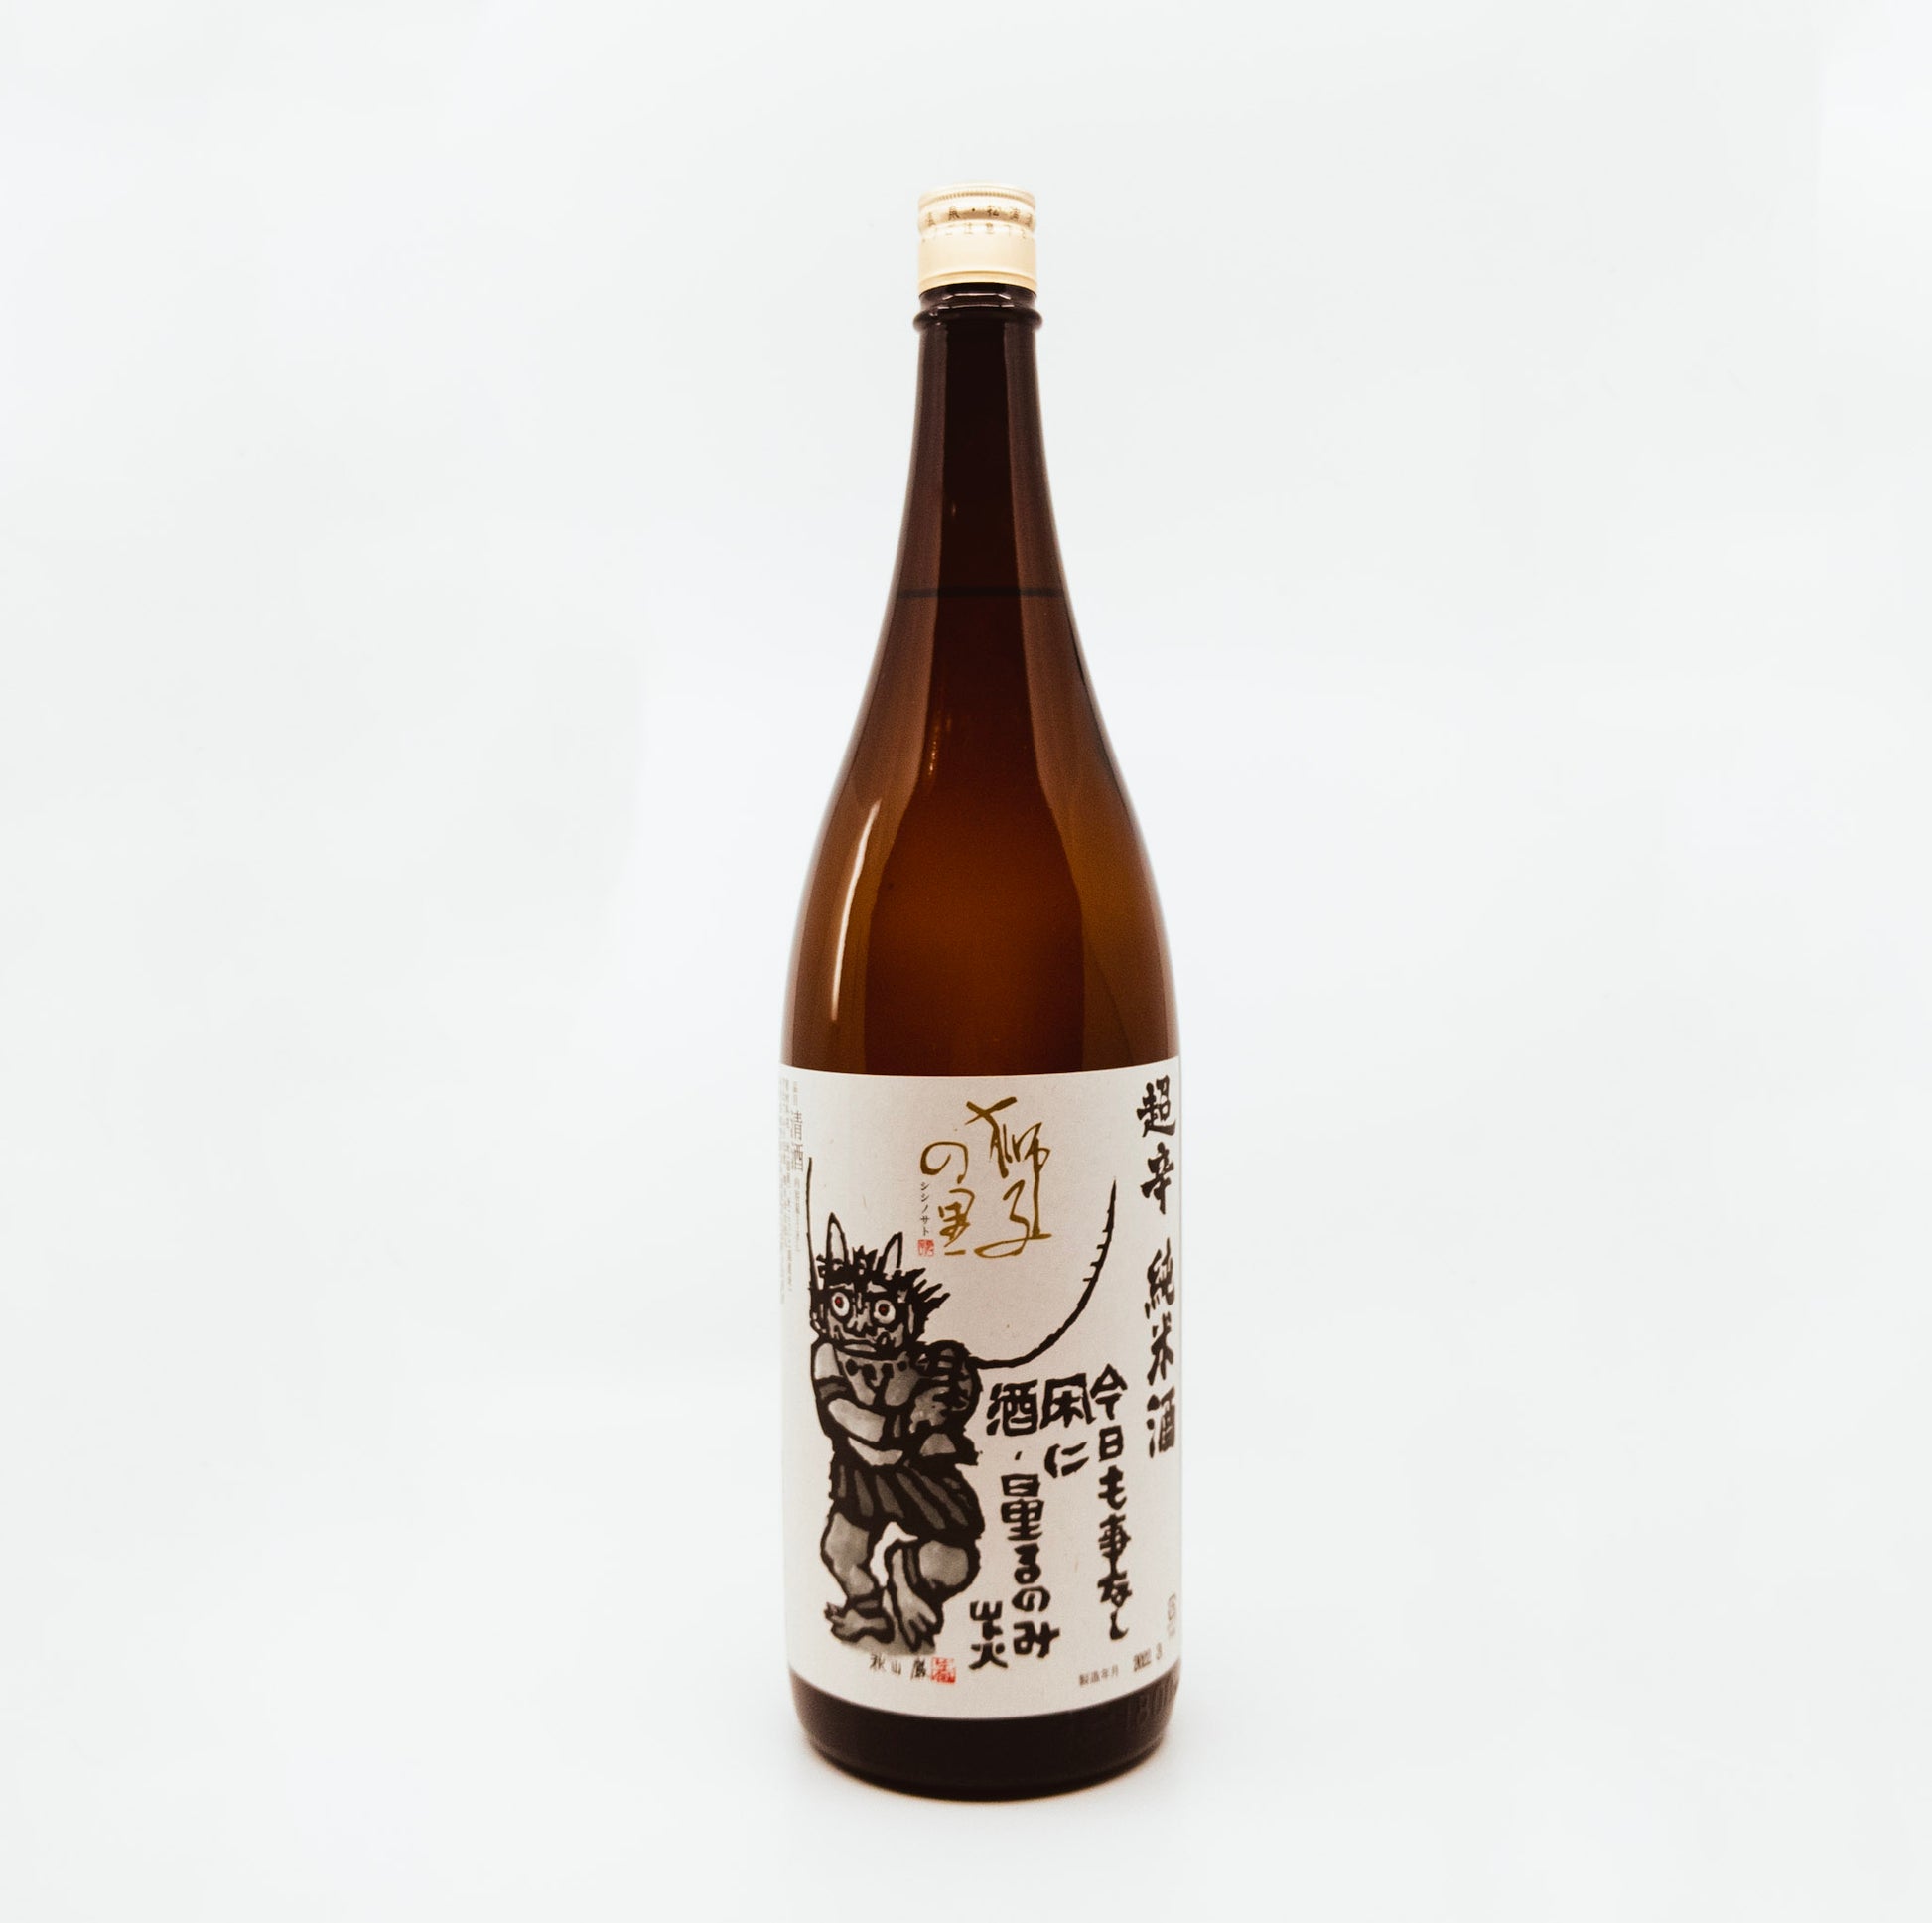 brown bottle with creature on label